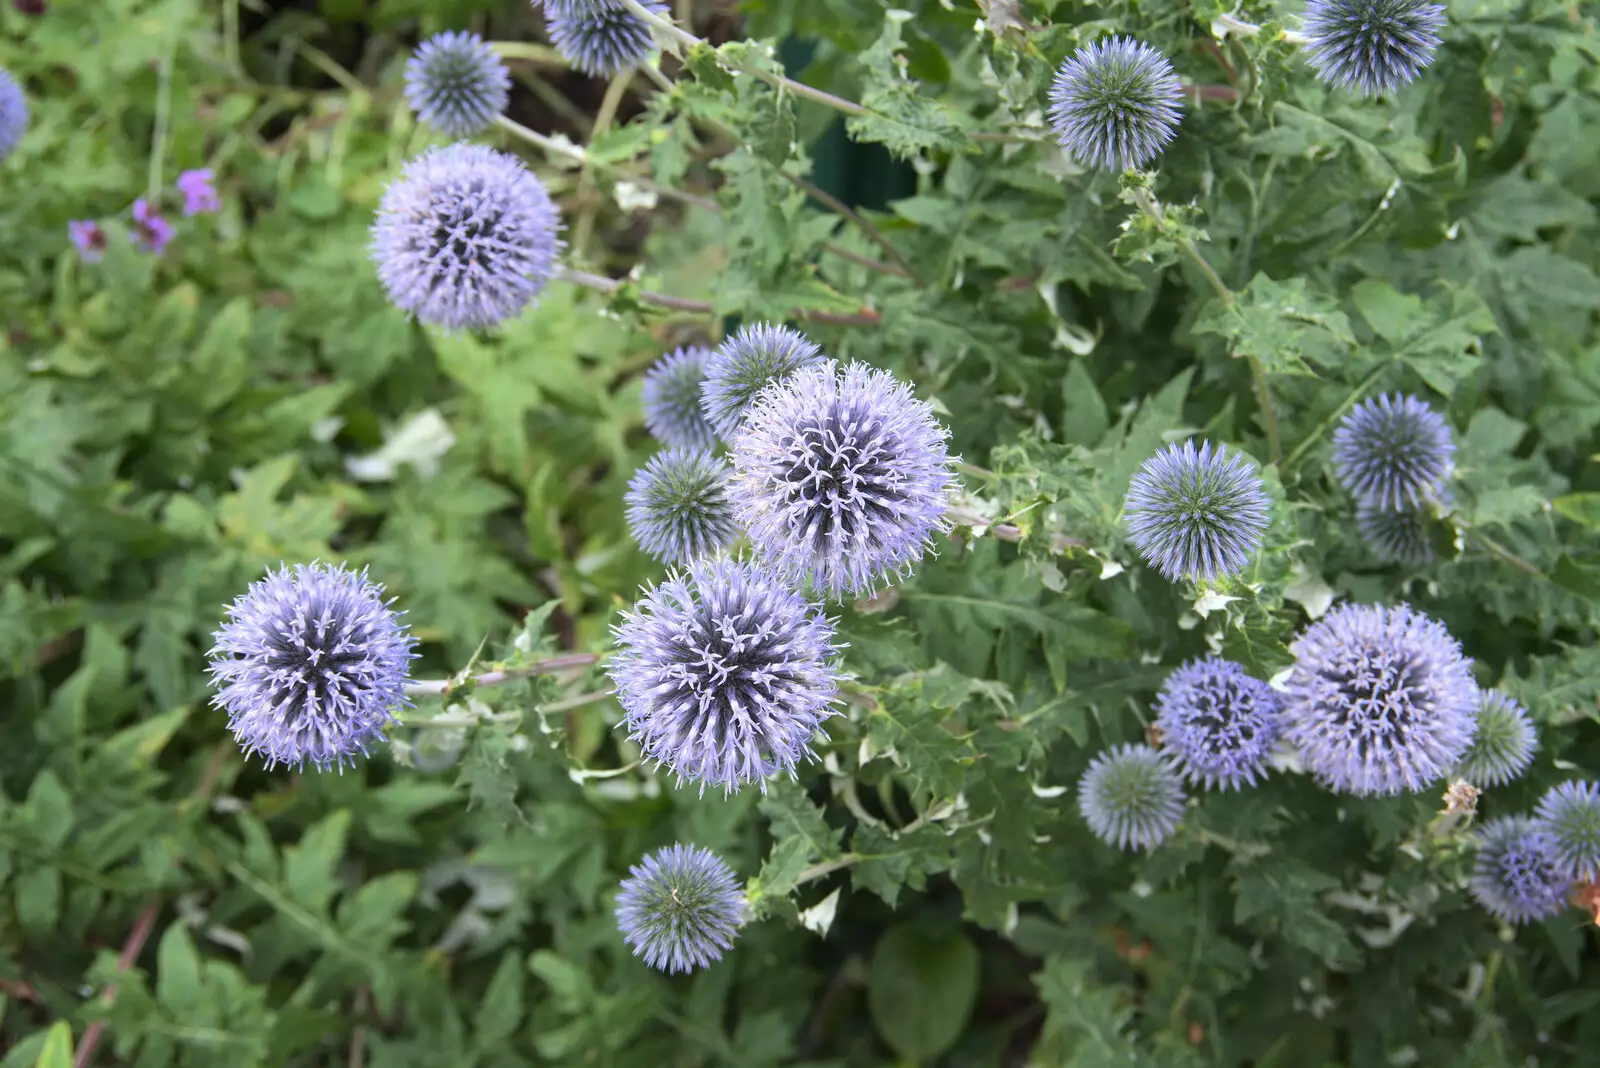 Cool spiky blue flowers, from Pork Pies and Dockside Dereliction, Melton Mowbray and Liverpool - 7th August 2021